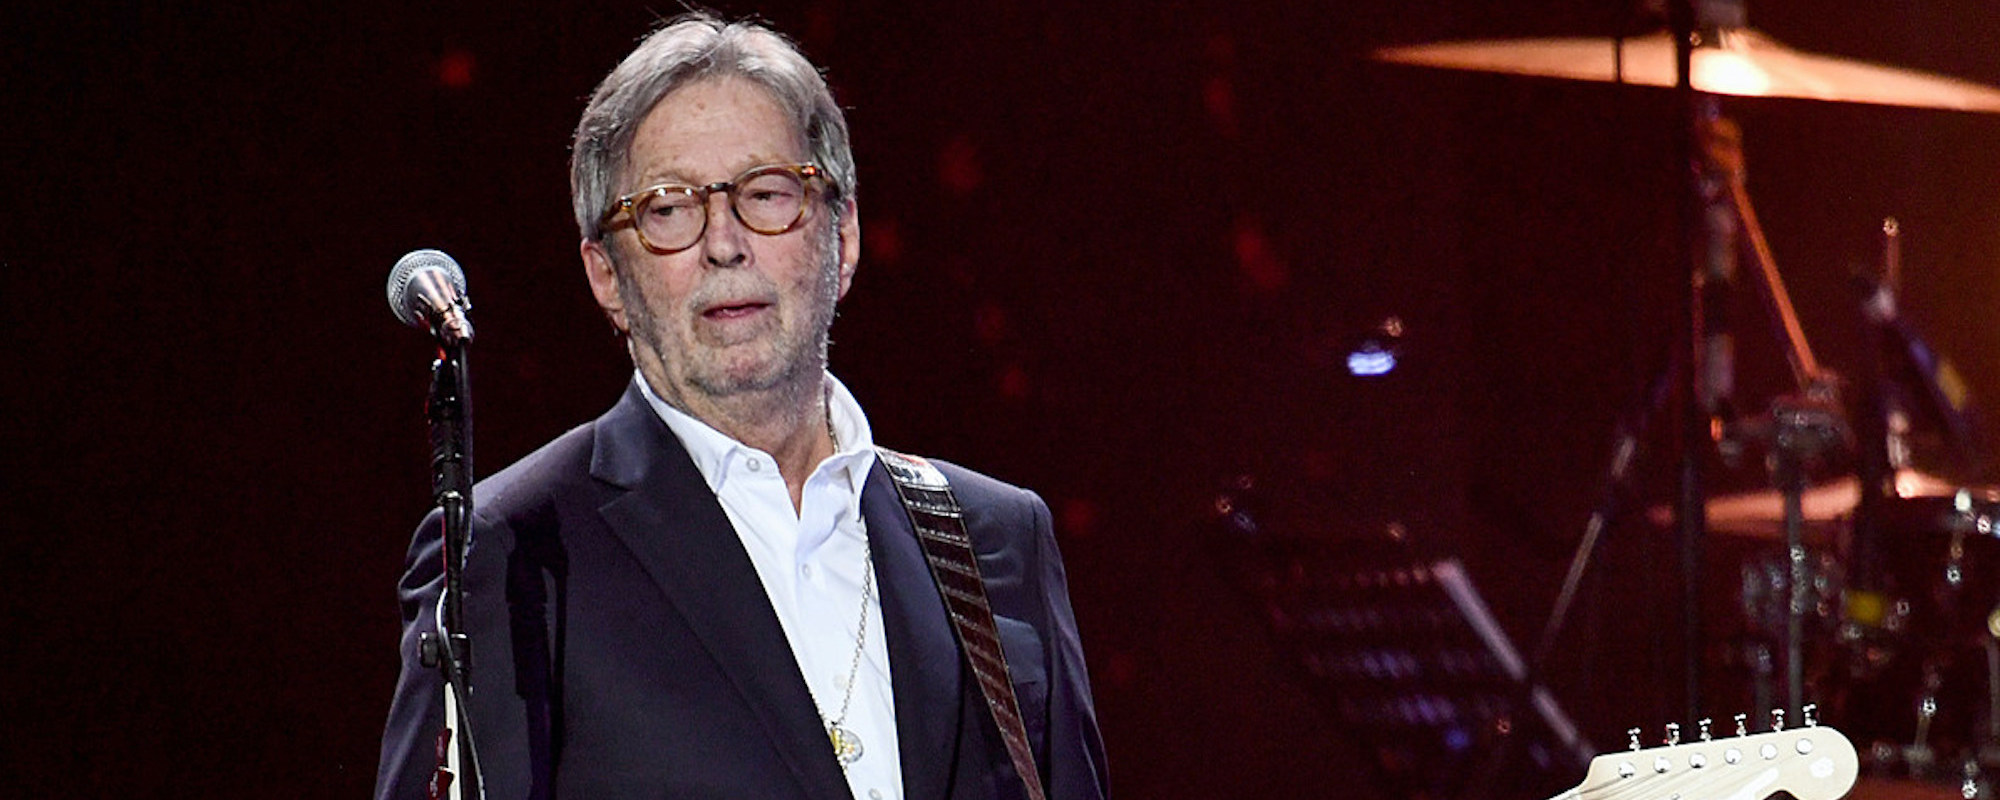 Guitarist Eric Clapton Played Venue Requiring Proof of Vaccination